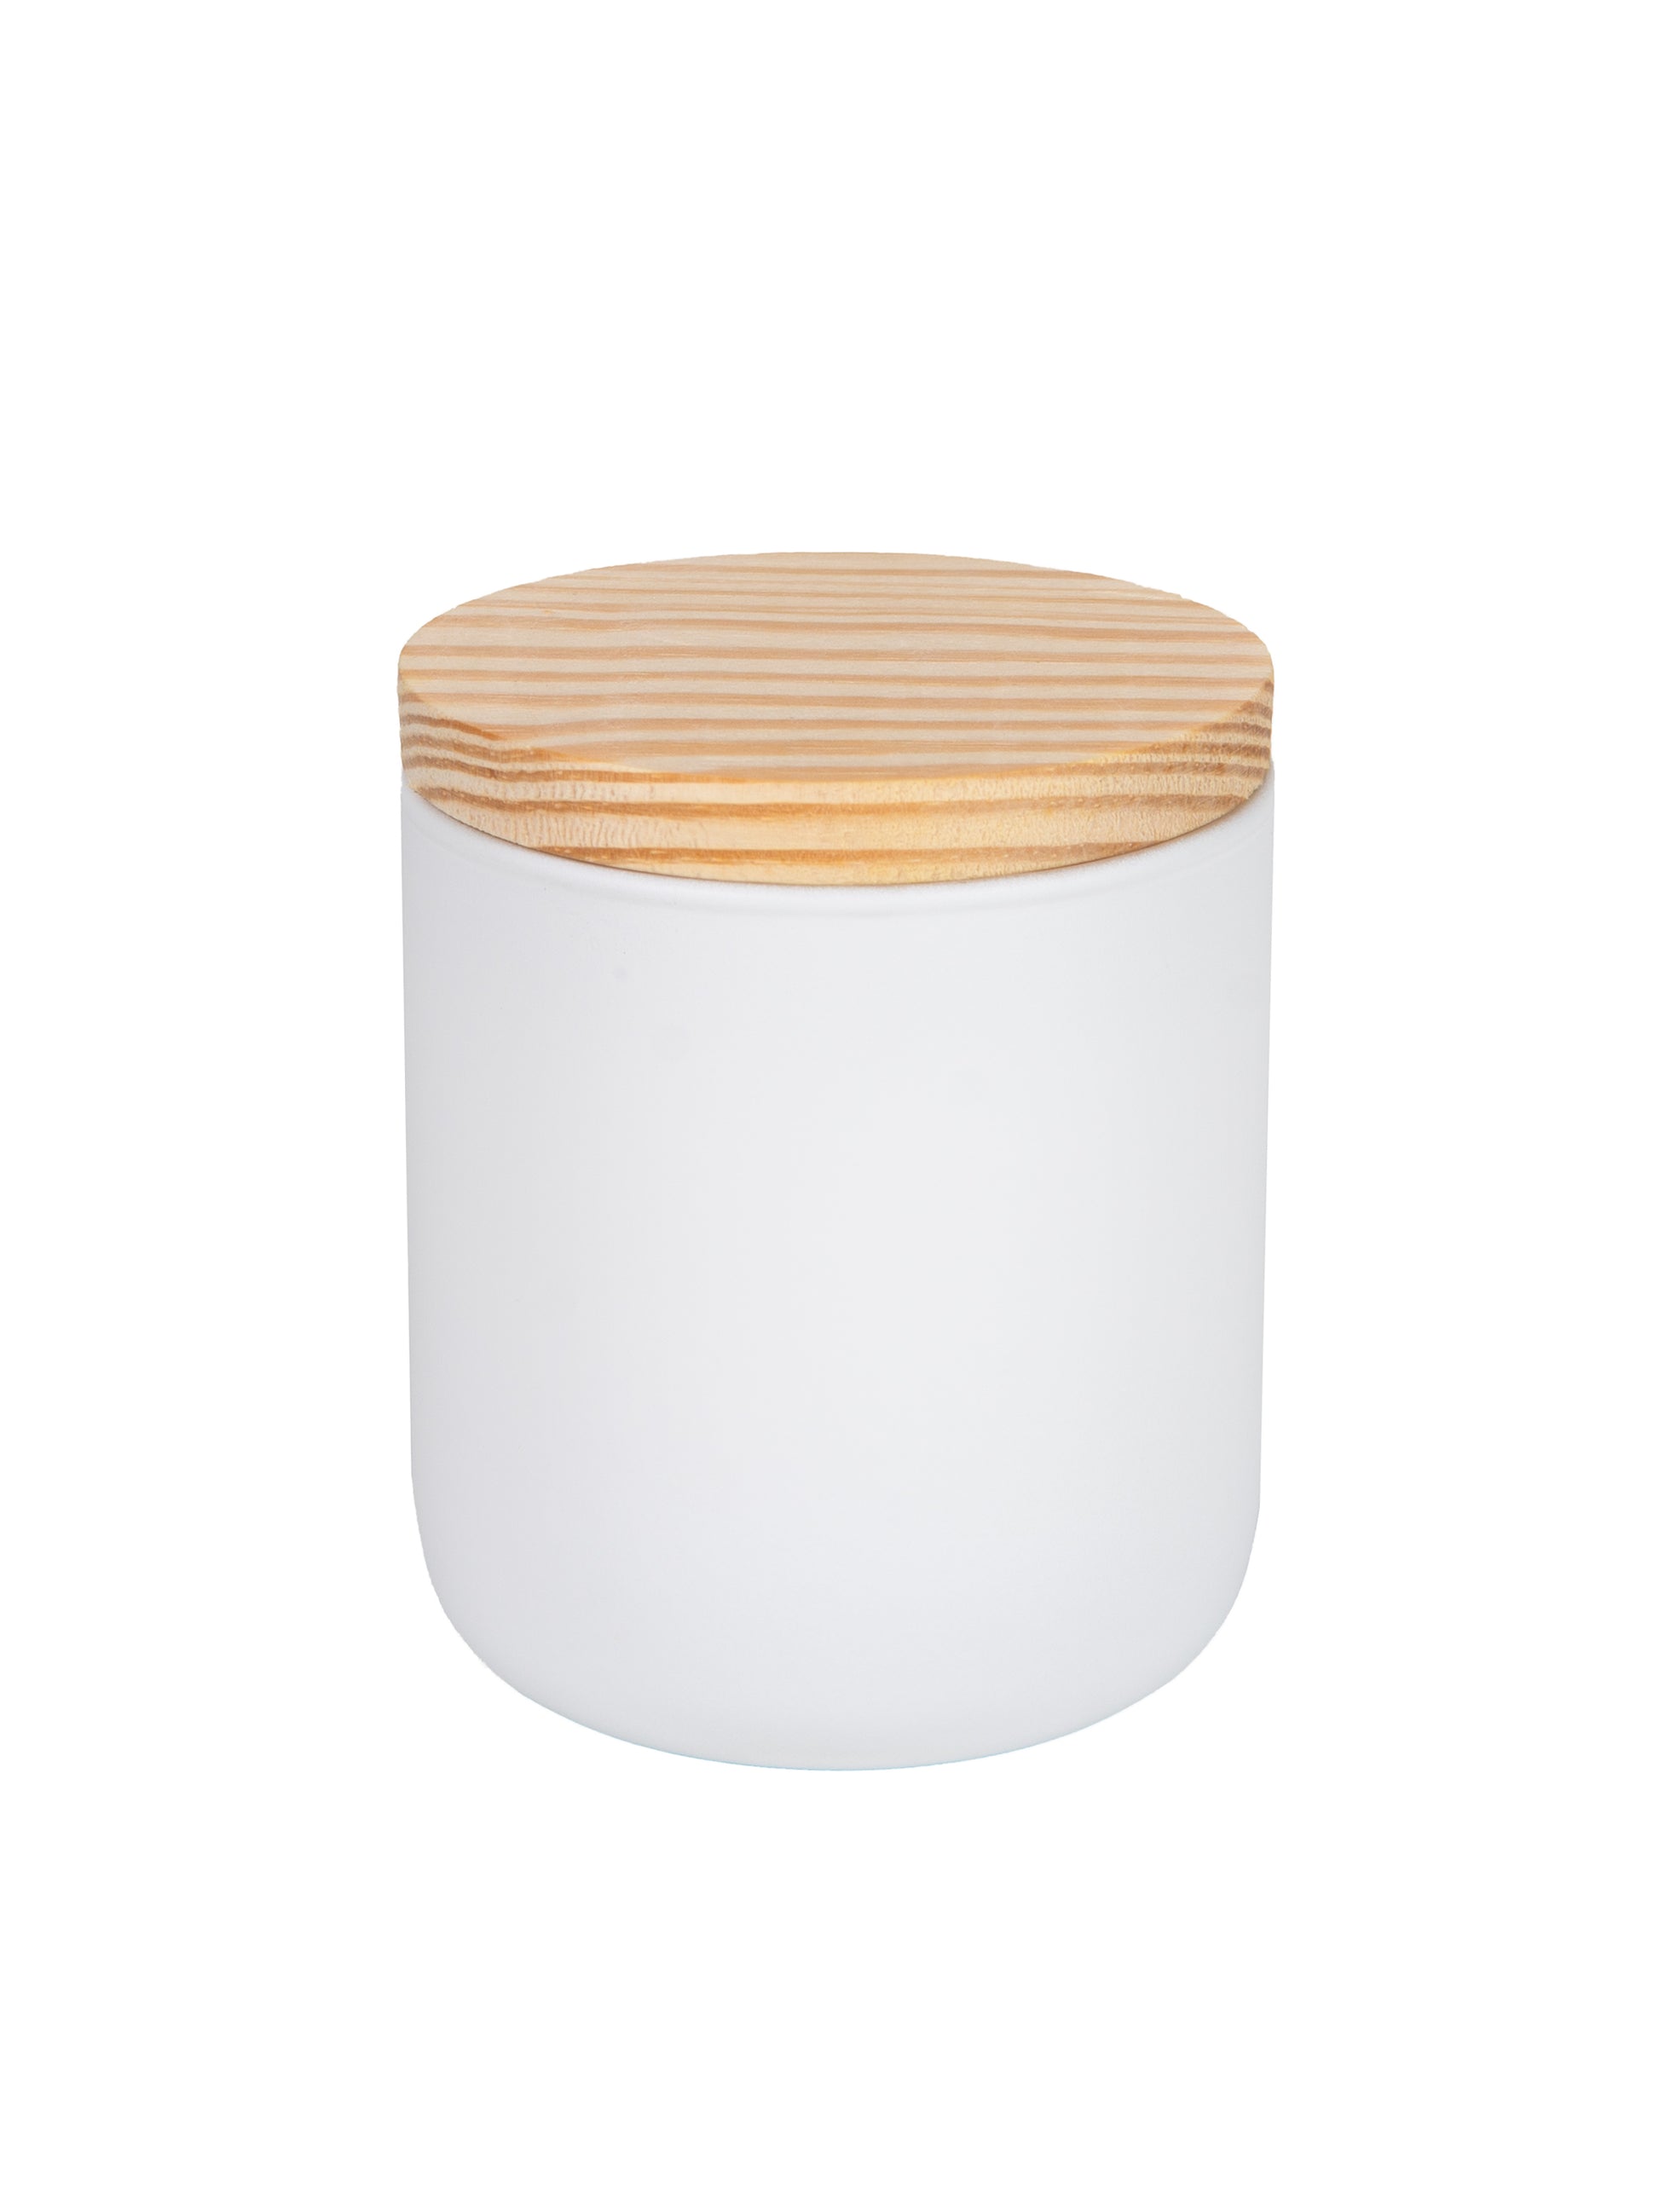 WT Signature Scent Candle Weston Table